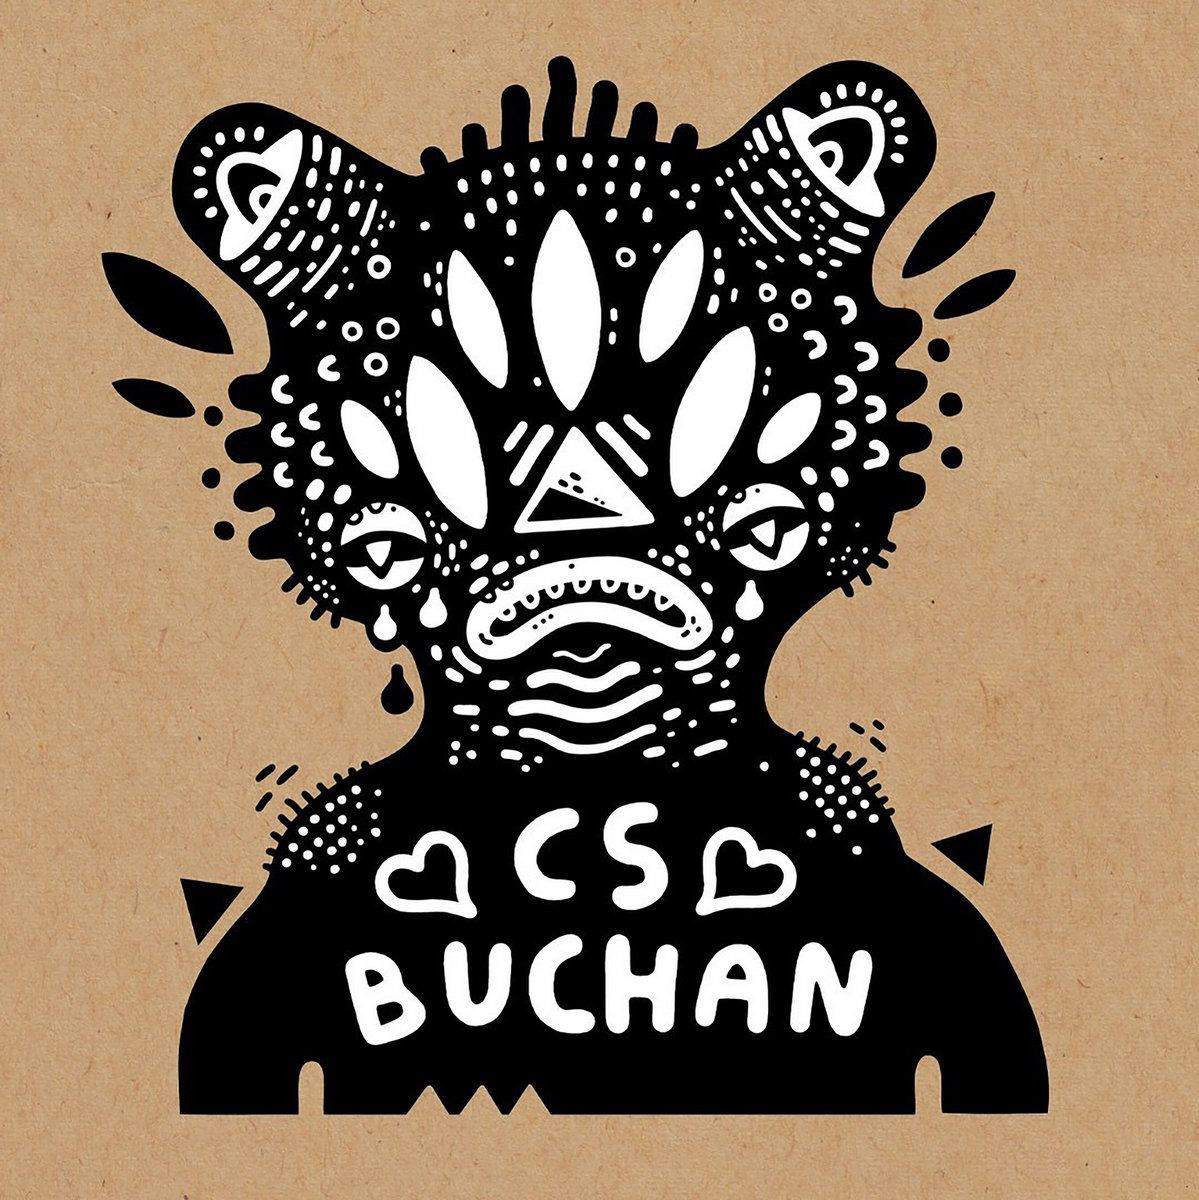 As usual the mighty CS Buchan has made a new album and hasn't really told anyone! So here's your notice to get it on your headphones at your earliest convenience. Charley is one of the most talented songwriters in the North East! Listen in full here >>> fitlikerecords.bandcamp.com/album/shaz-bee